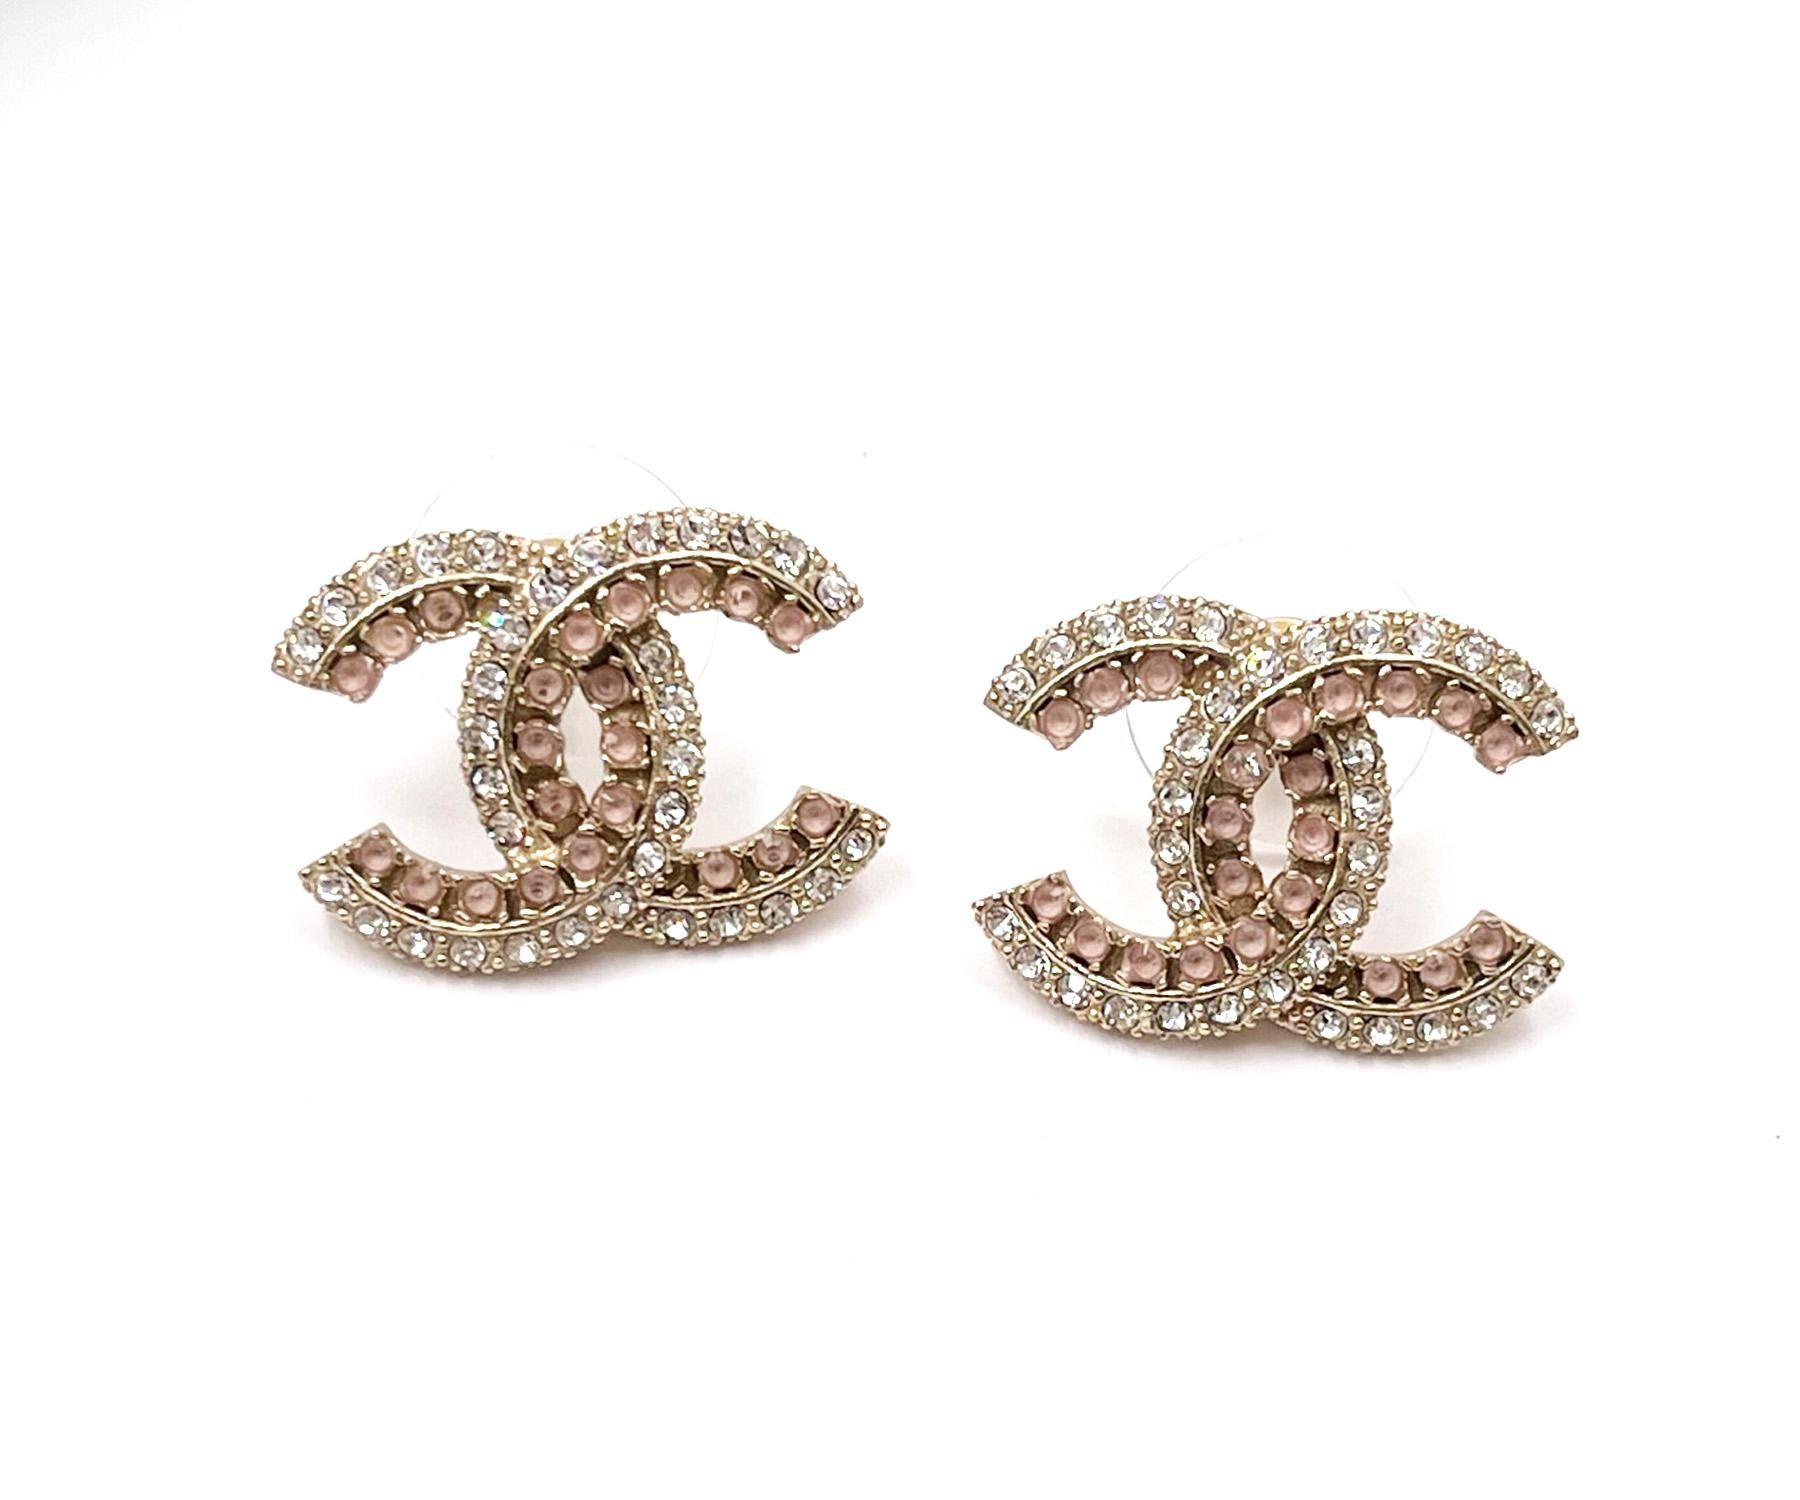 Chanel Gold CC Pink Double Crystal Piercing Earrings

*Marked 05
*Made in France
*Comes with the original box

-It is approximately 0.9